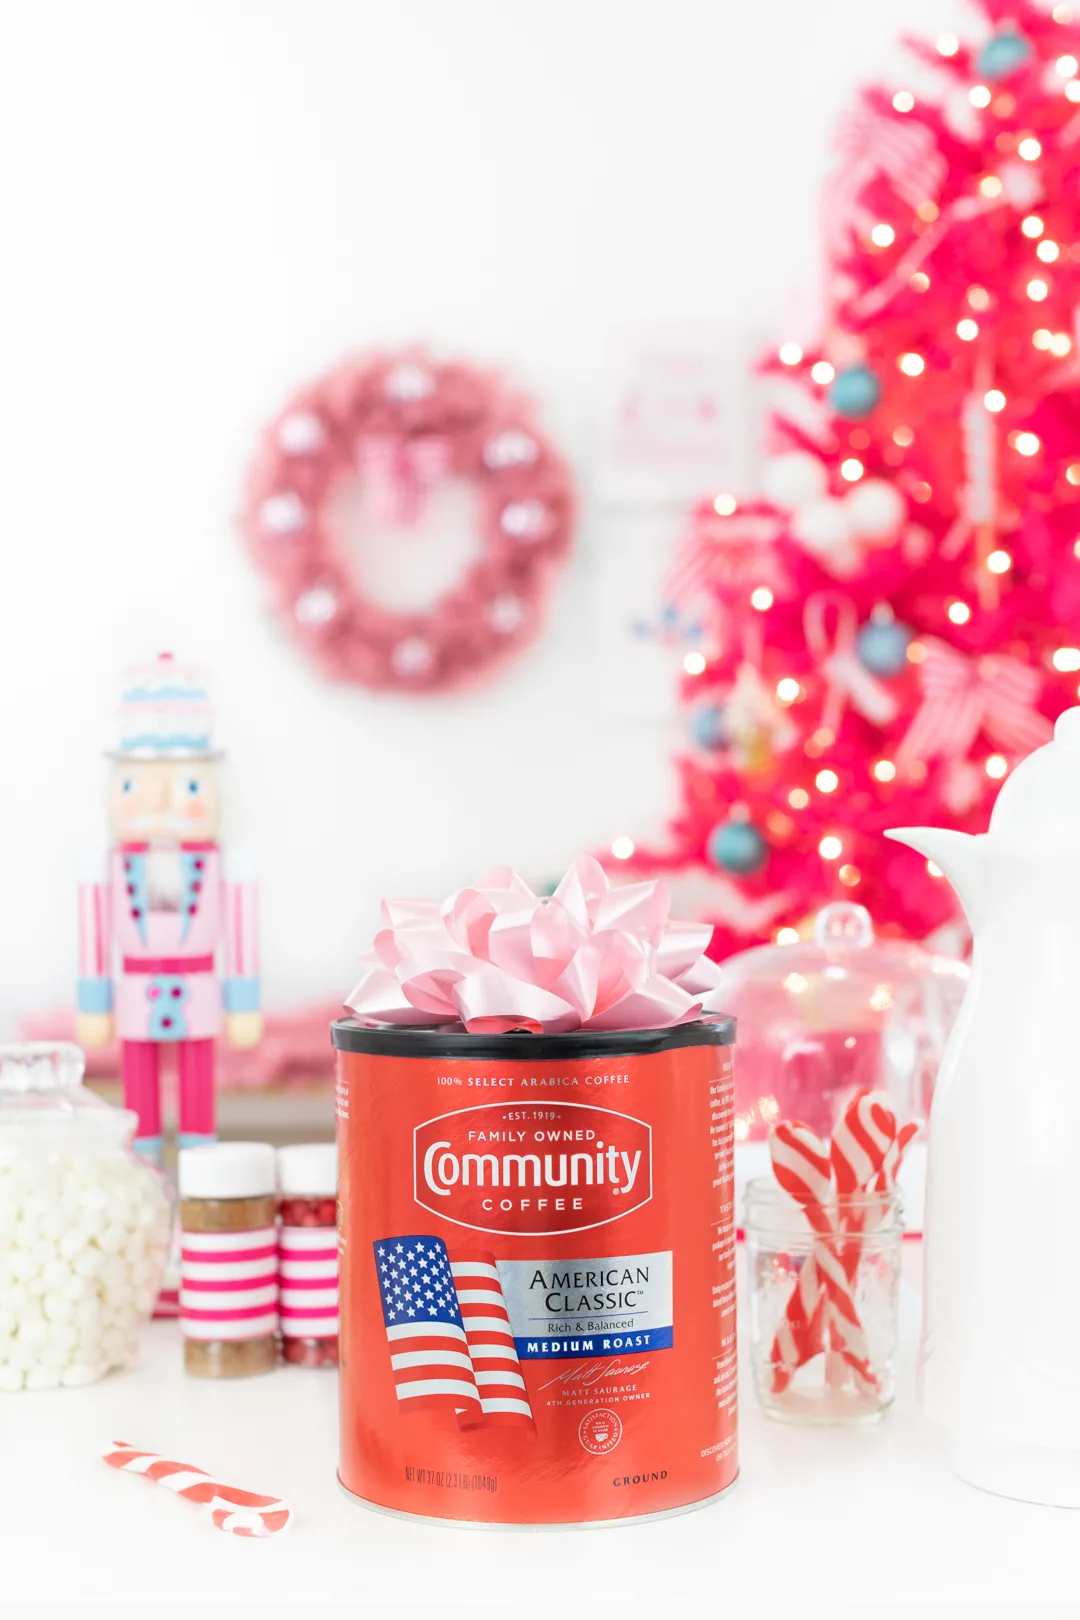 Community Coffee American Blend Canister. Walmart exclusive.